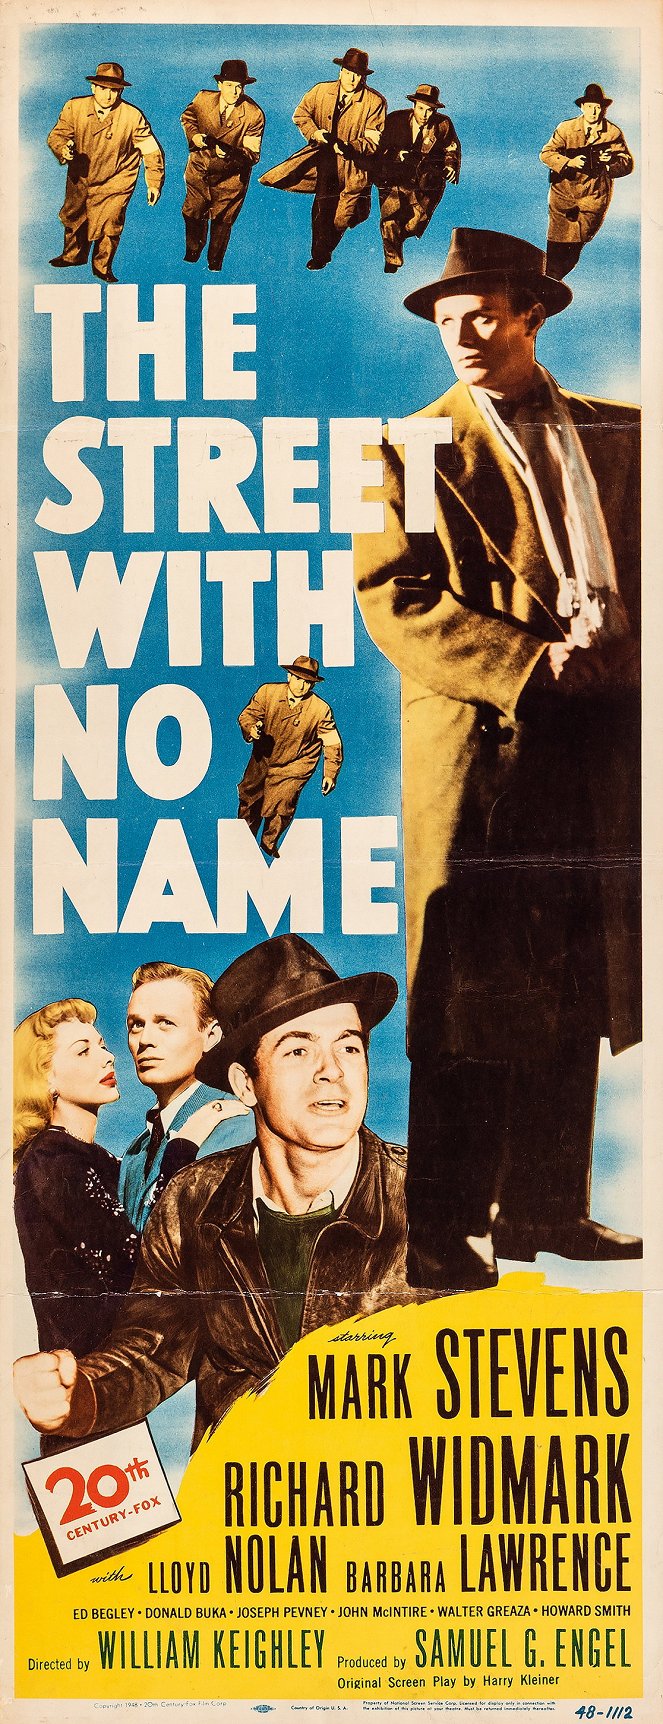 The Street with No Name - Posters